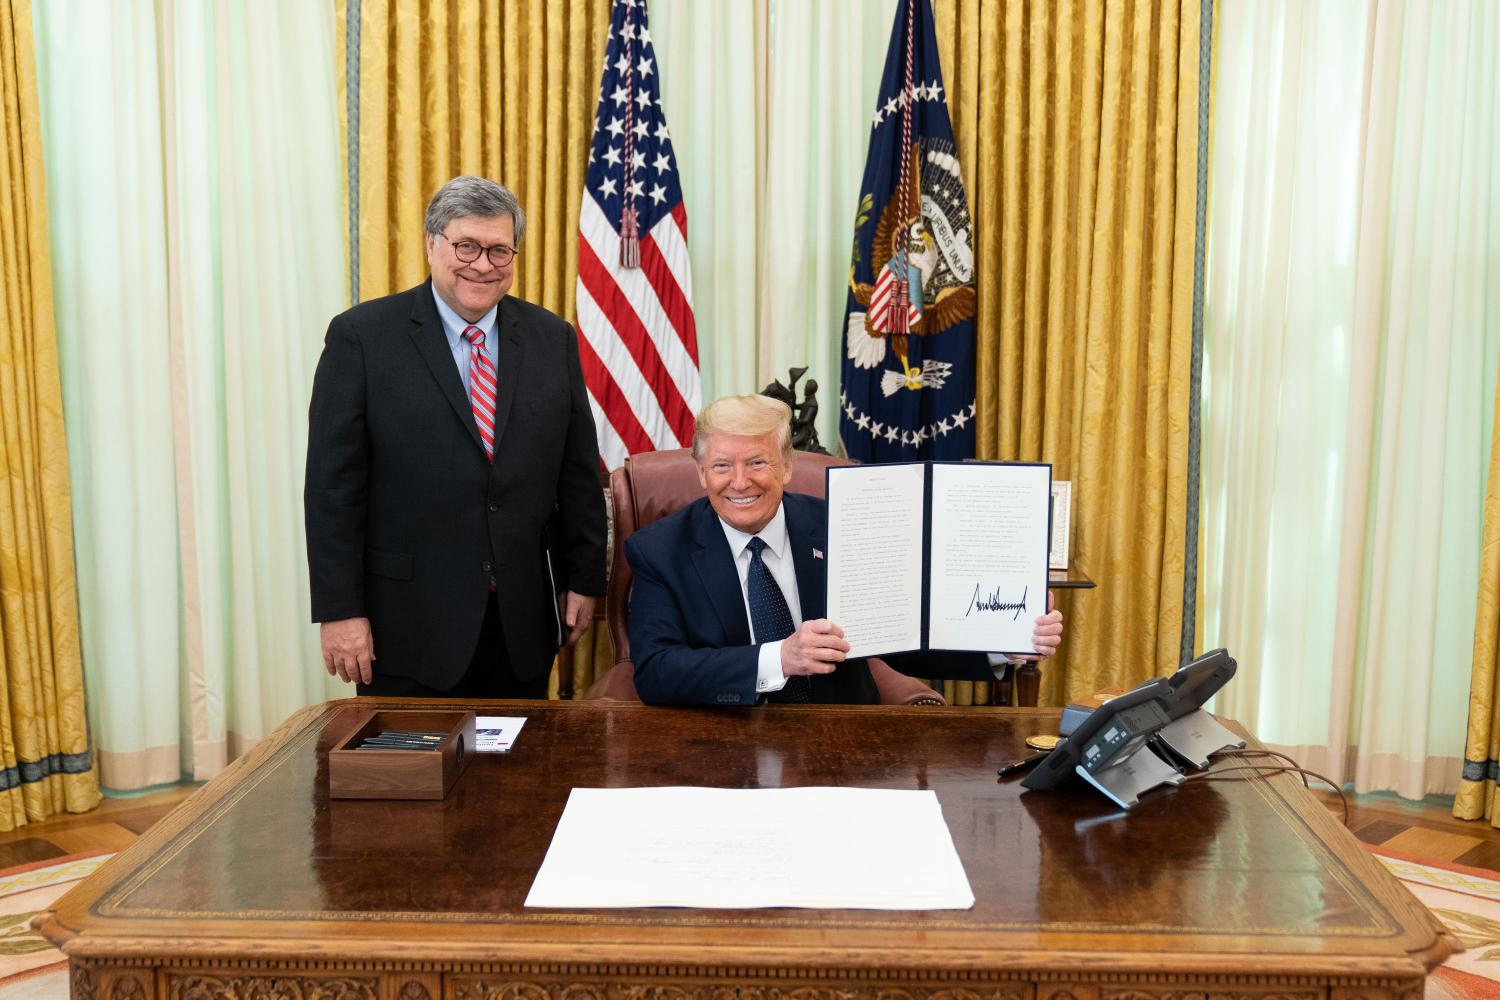 WASHINGTON, UNITED STATES - President Donald J. Trump (right) signs an executive order on preventing online censorship in the Oval Office of the White House in Washington, United States on May 28, 2020. Trump signed an executive order that directs federal agencies to clarify the scope of a US law known as Section 230, which protects Internet companies from liability for content posted by users and allows them to regulate or delete posts that, while legal, are objectionable.